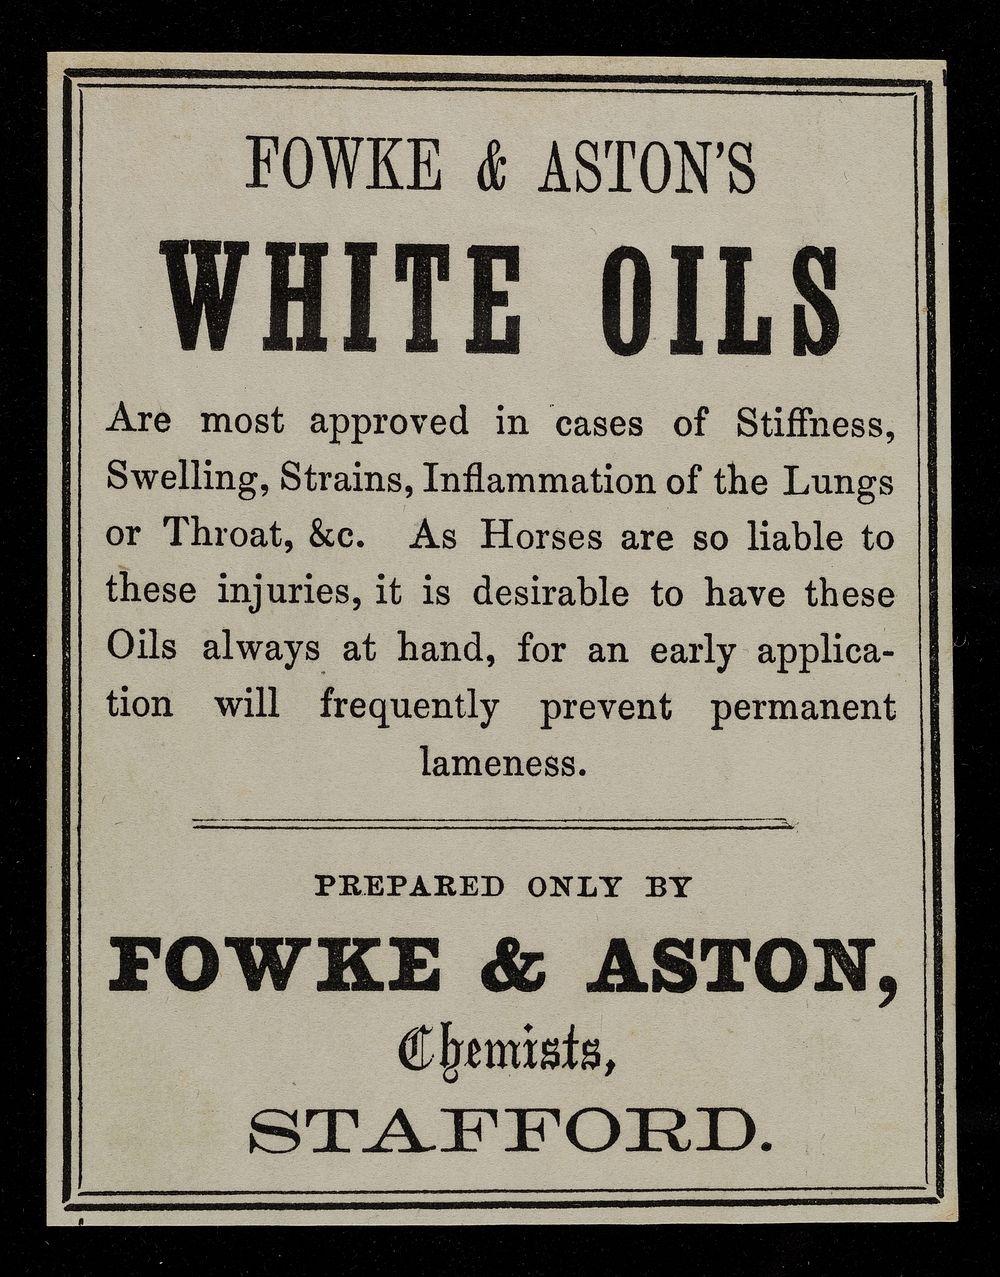 Fowke & Aston's white oils are most approved in cases of stiffness, swelling, strains, inflammation of the lungs or throat…